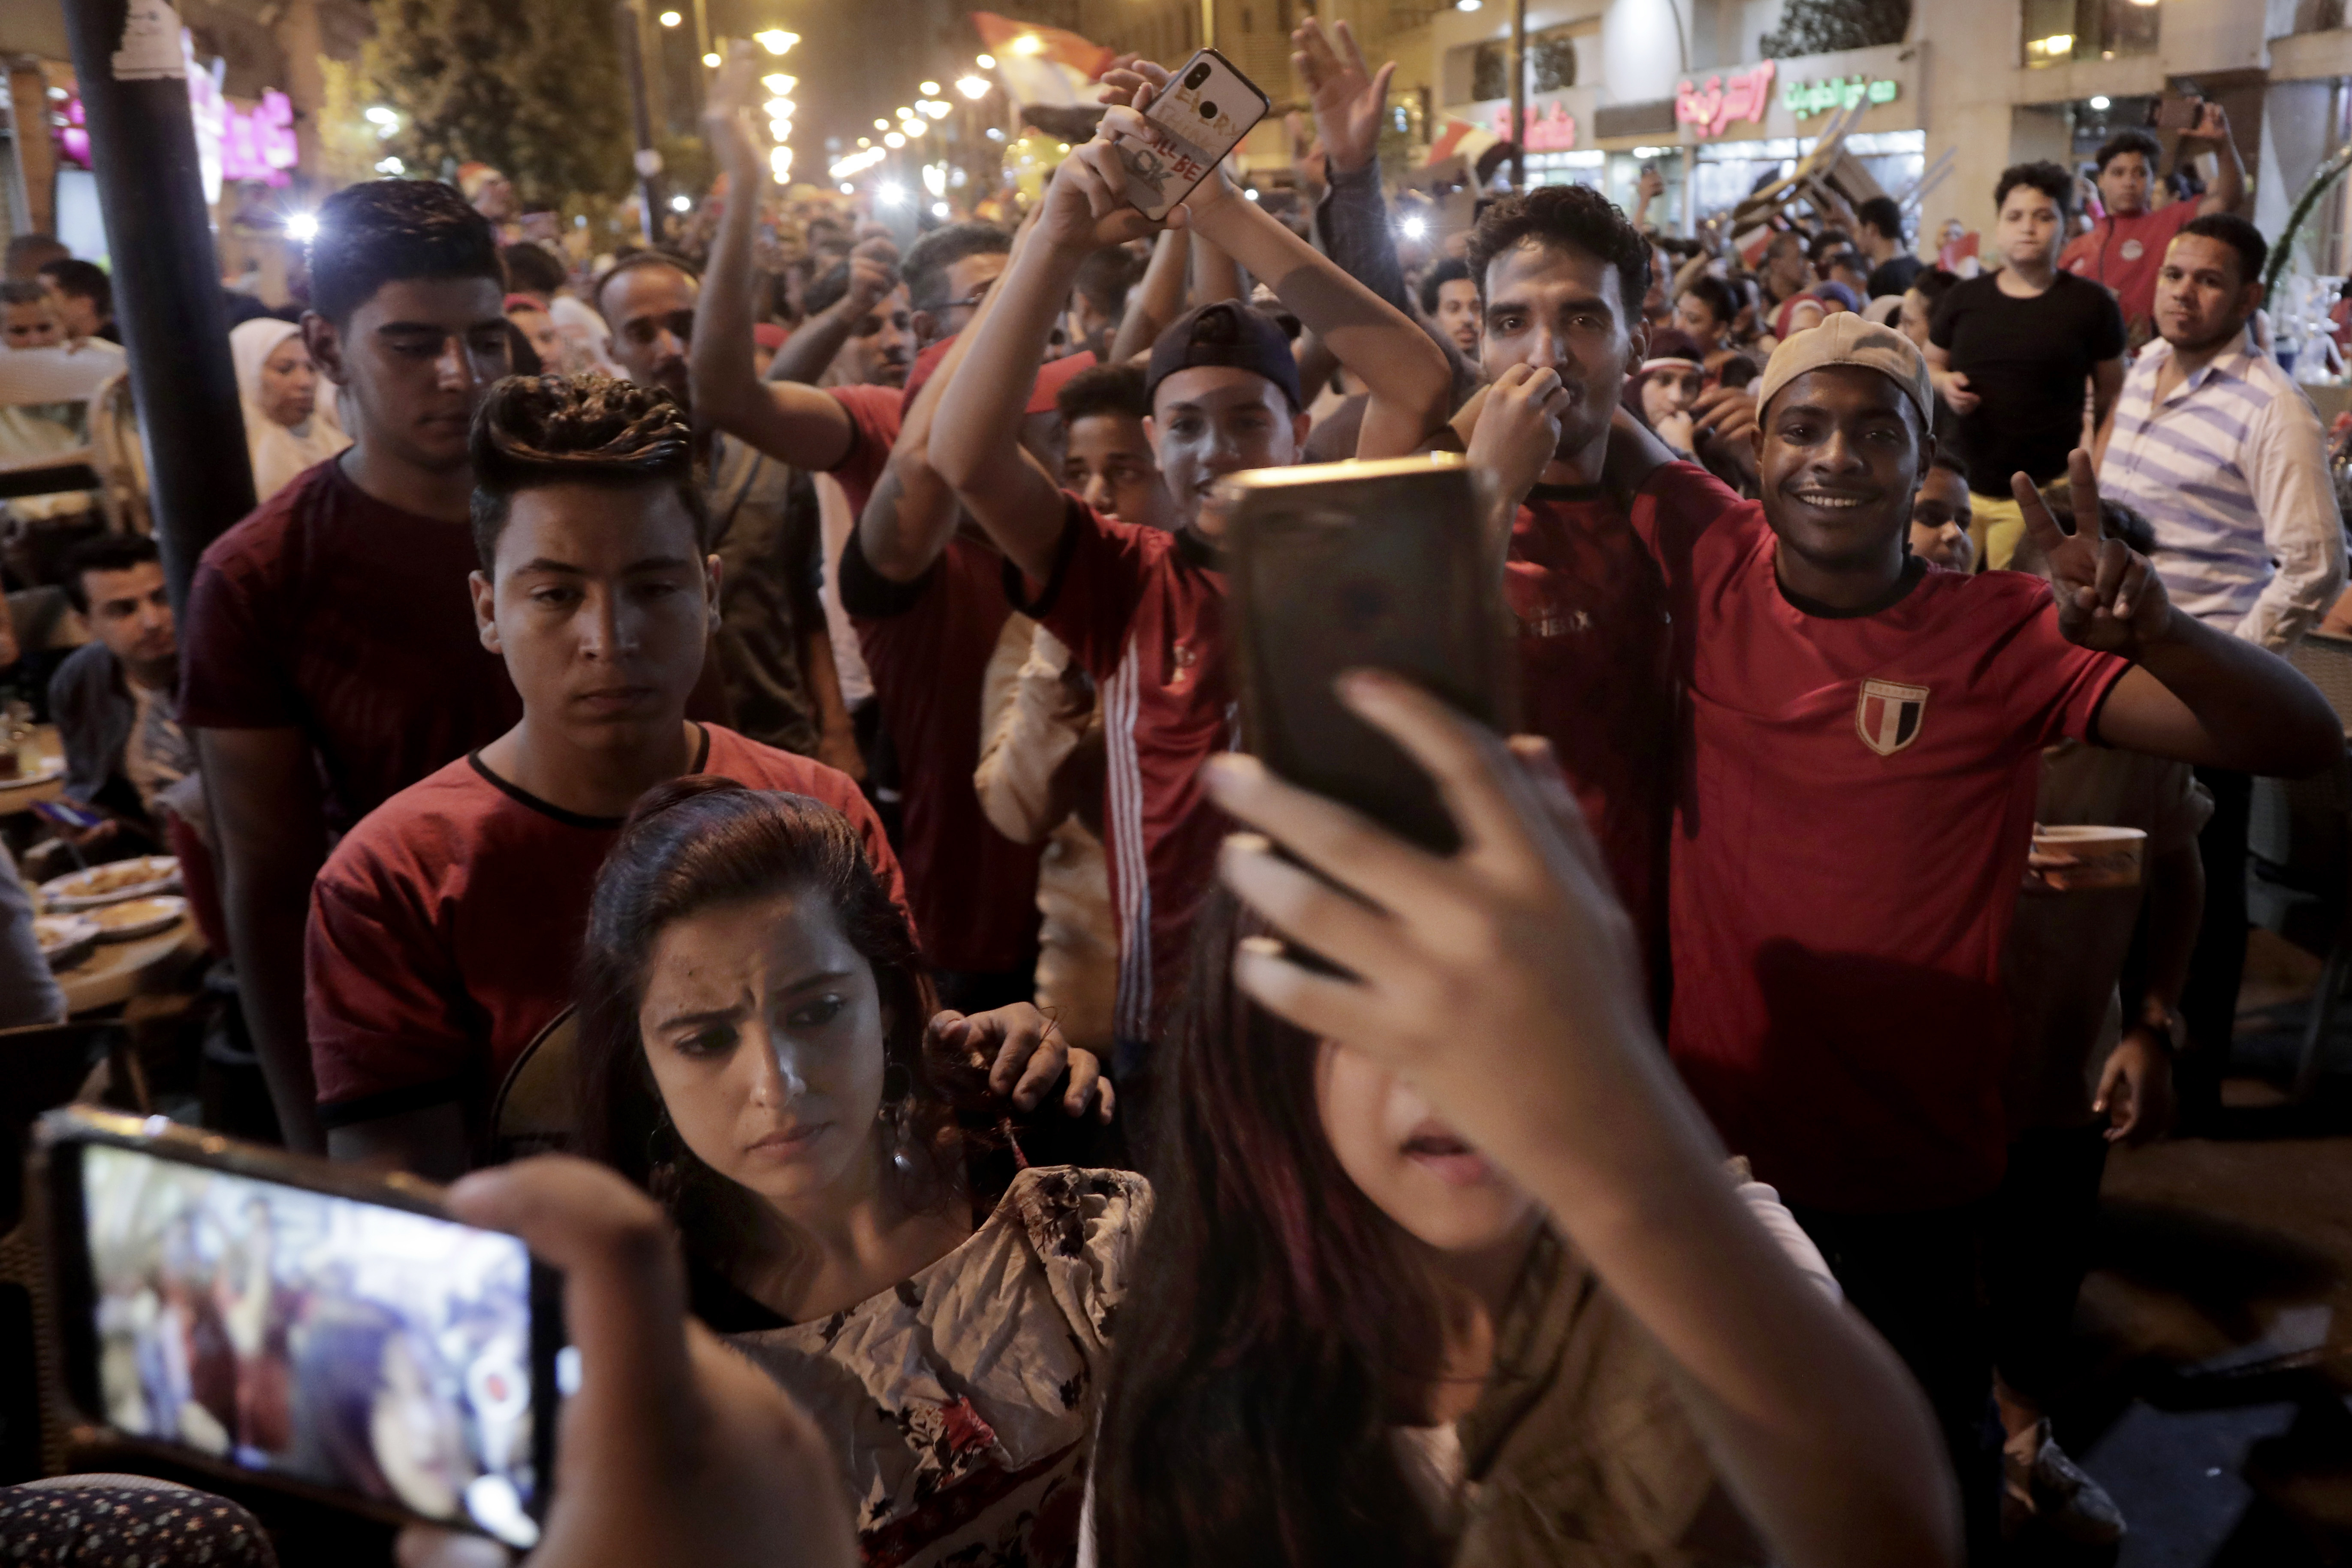 Egyptian soccer fans celebrate after their team won against Zimbabwe during the Africa Cup of Nations, on a street in Cairo, Egypt, Friday, June 21, 2019. (AP Photo/Nariman El-Mofty)